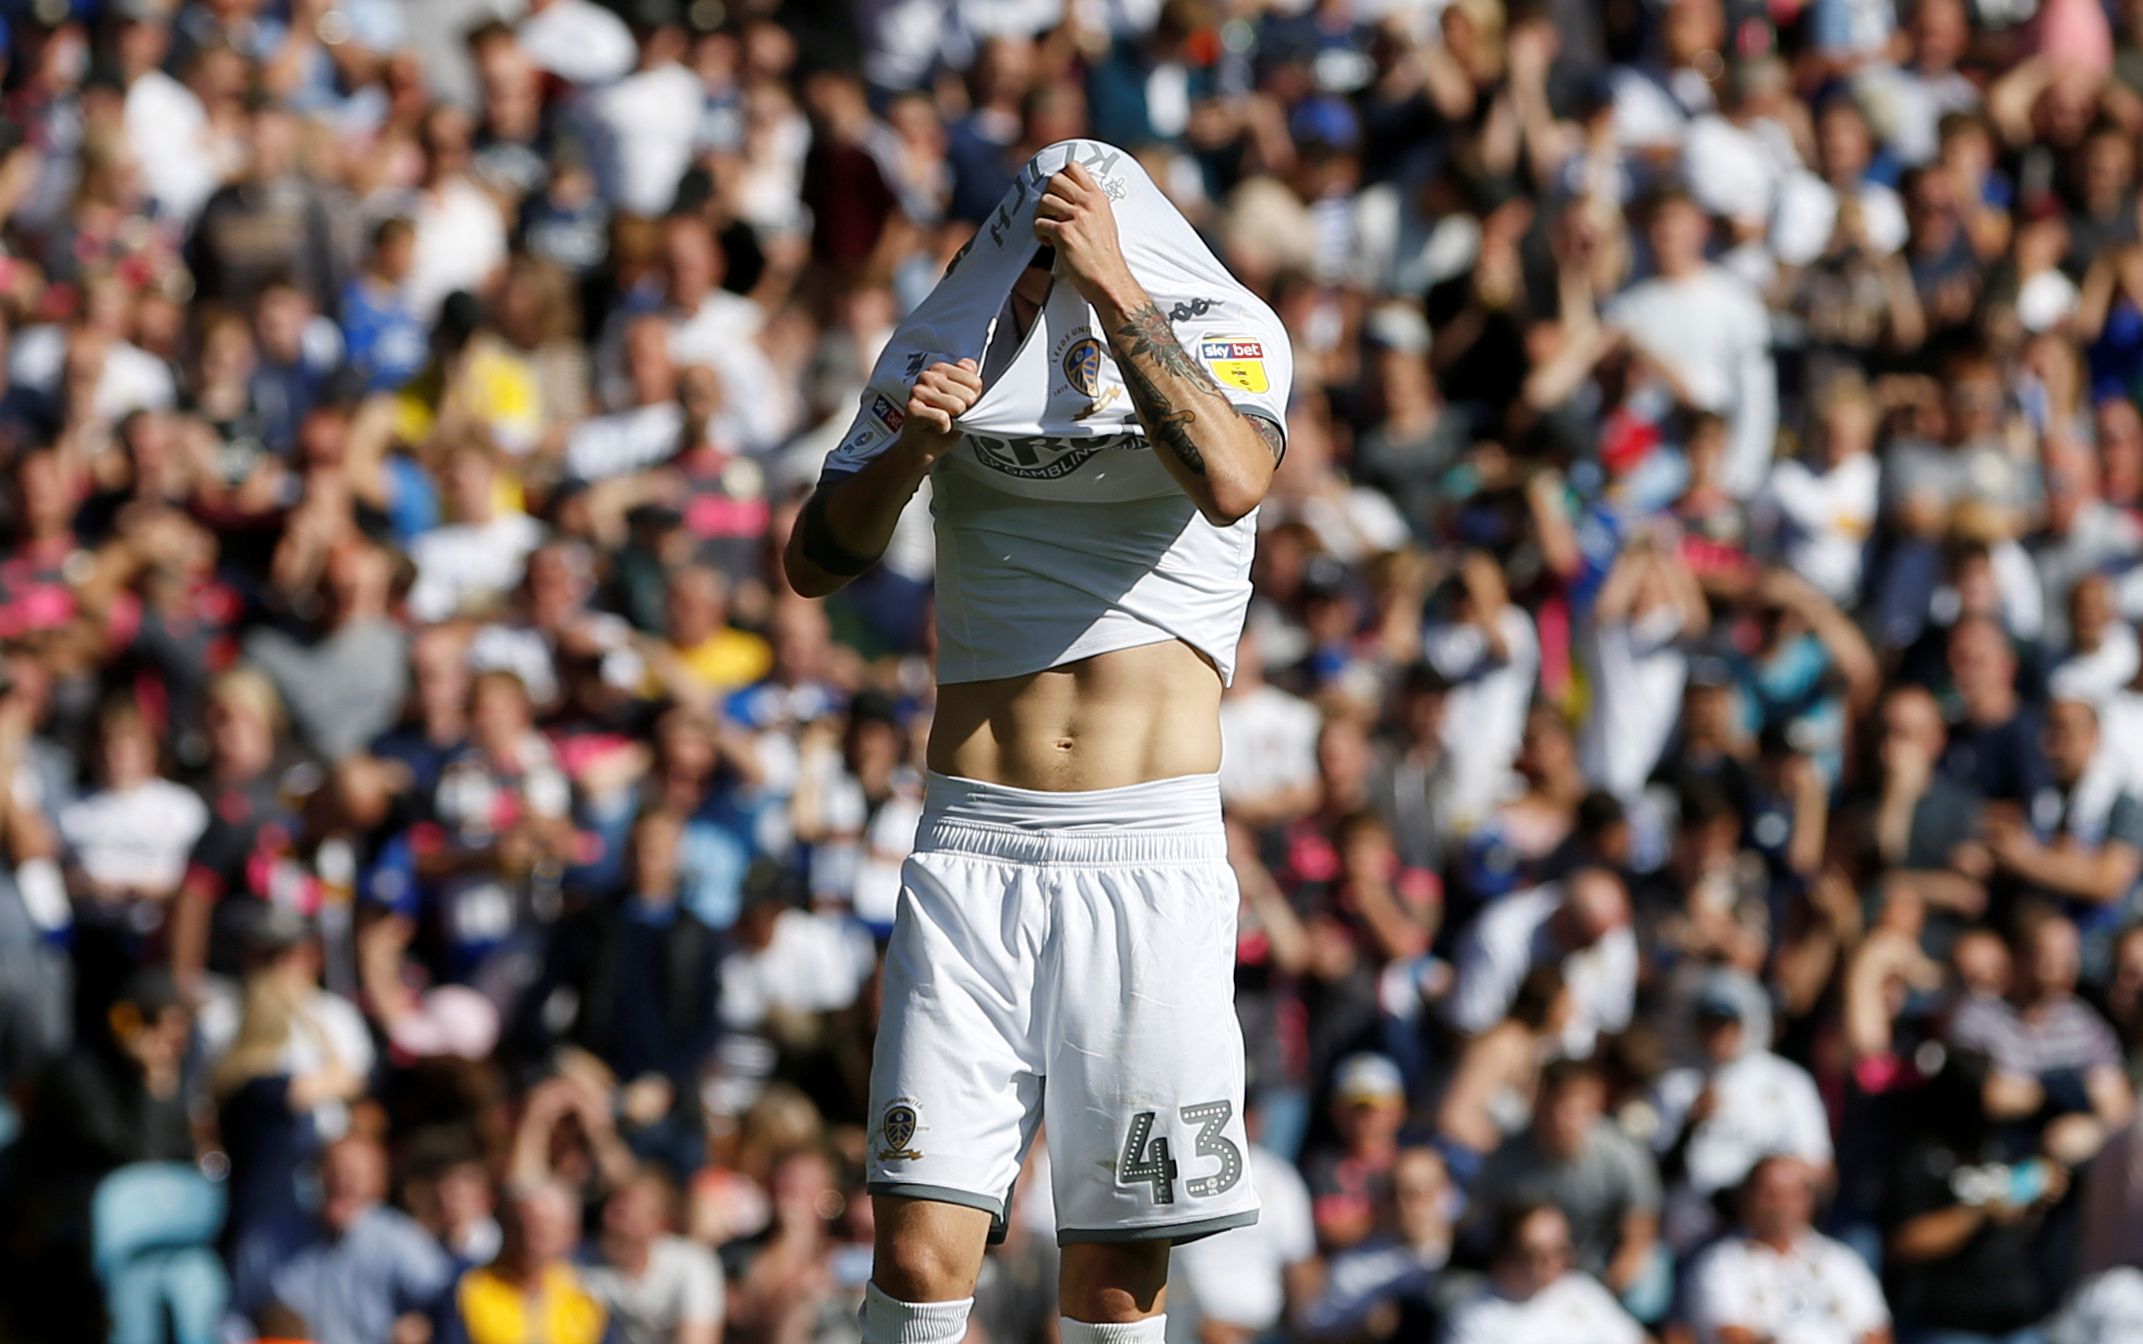 Soccer Football - Championship - Leeds United v Derby County - Elland Road, Leeds, Britain - September 21, 2019  Leeds United's Mateusz Klich reacts after failing to score from a penalty  Action Images/Ed Sykes  EDITORIAL USE ONLY. No use with unauthorized audio, video, data, fixture lists, club/league logos or "live" services. Online in-match use limited to 75 images, no video emulation. No use in betting, games or single club/league/player publications.  Please contact your account representat